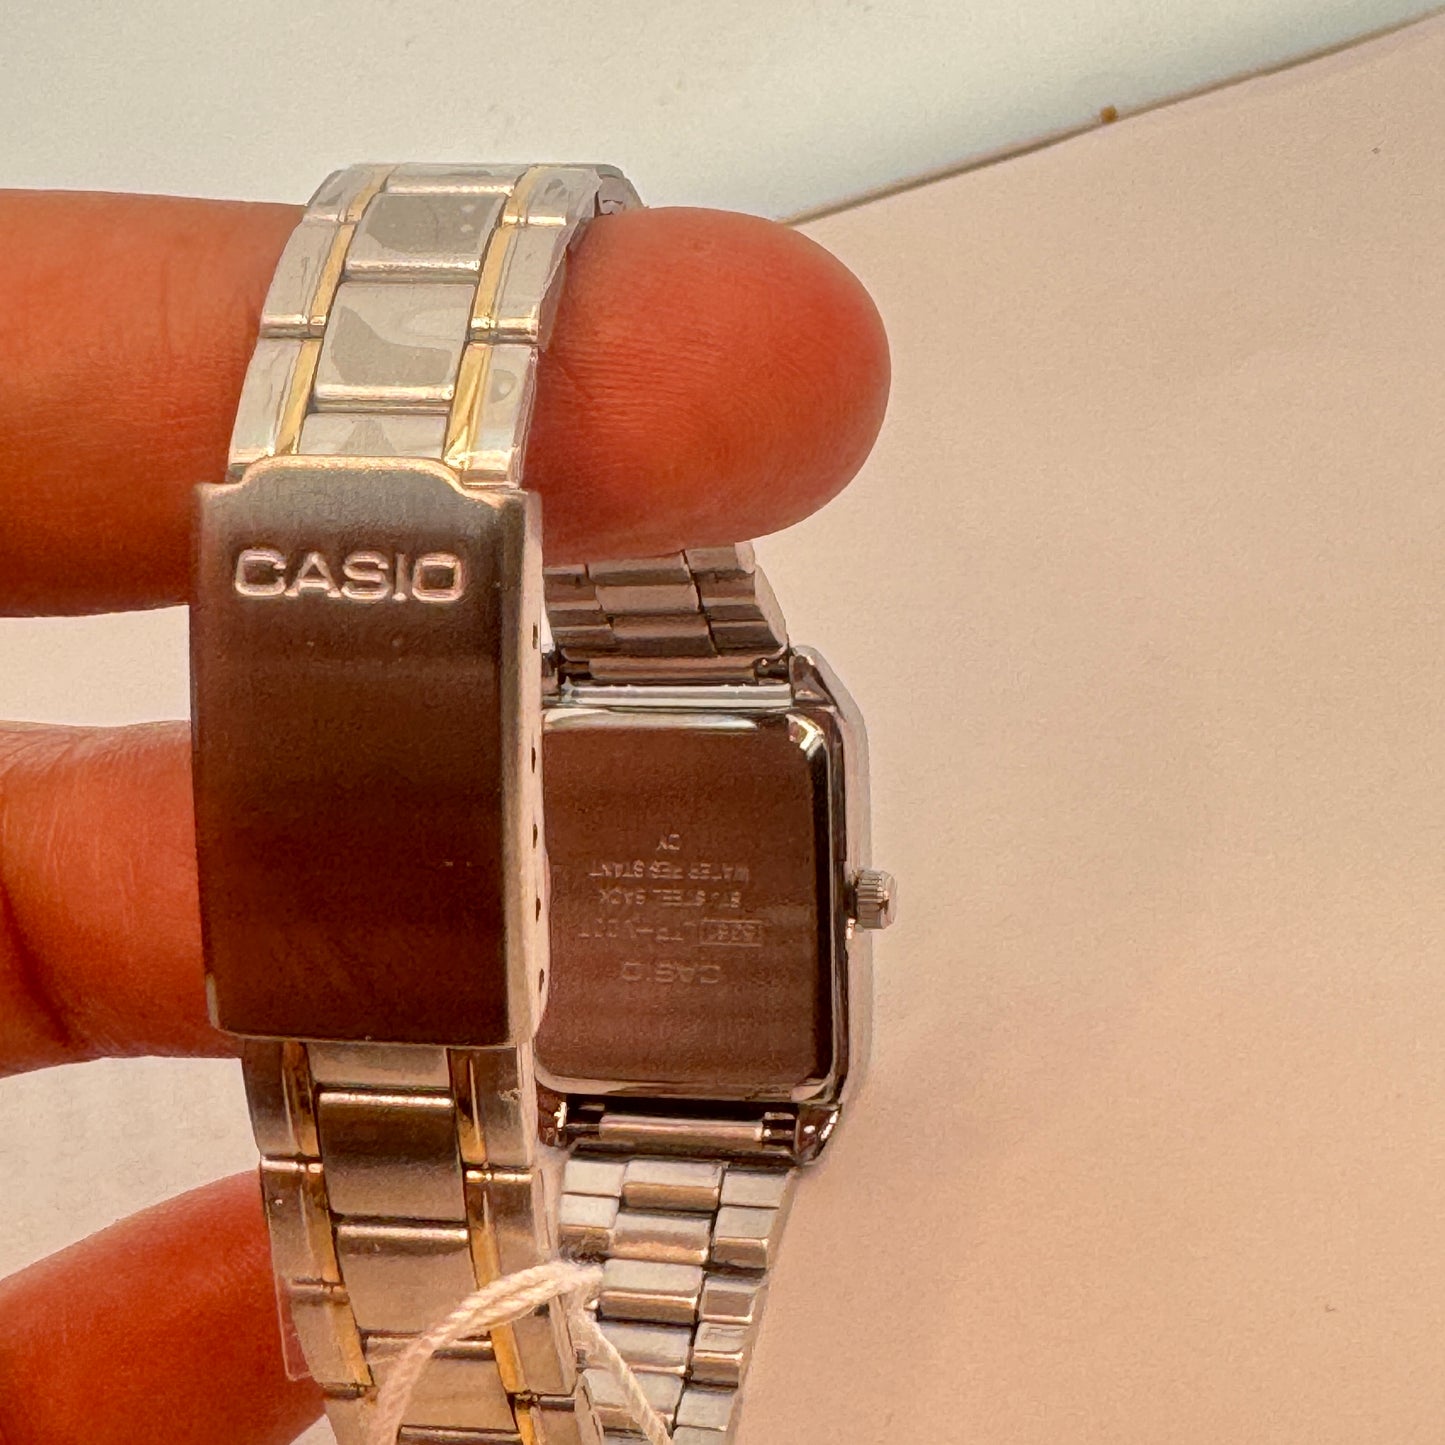 Ladies Casio Watch Adult /Ladies or  for Young Teen Bracelet Watch too 
extra small size 
Fancy  Band New Watch 

Stainless Steel 
New Battery Installed Inside 
Band Length is aroud 7 inches Long

30 mm Diameter Extra Small